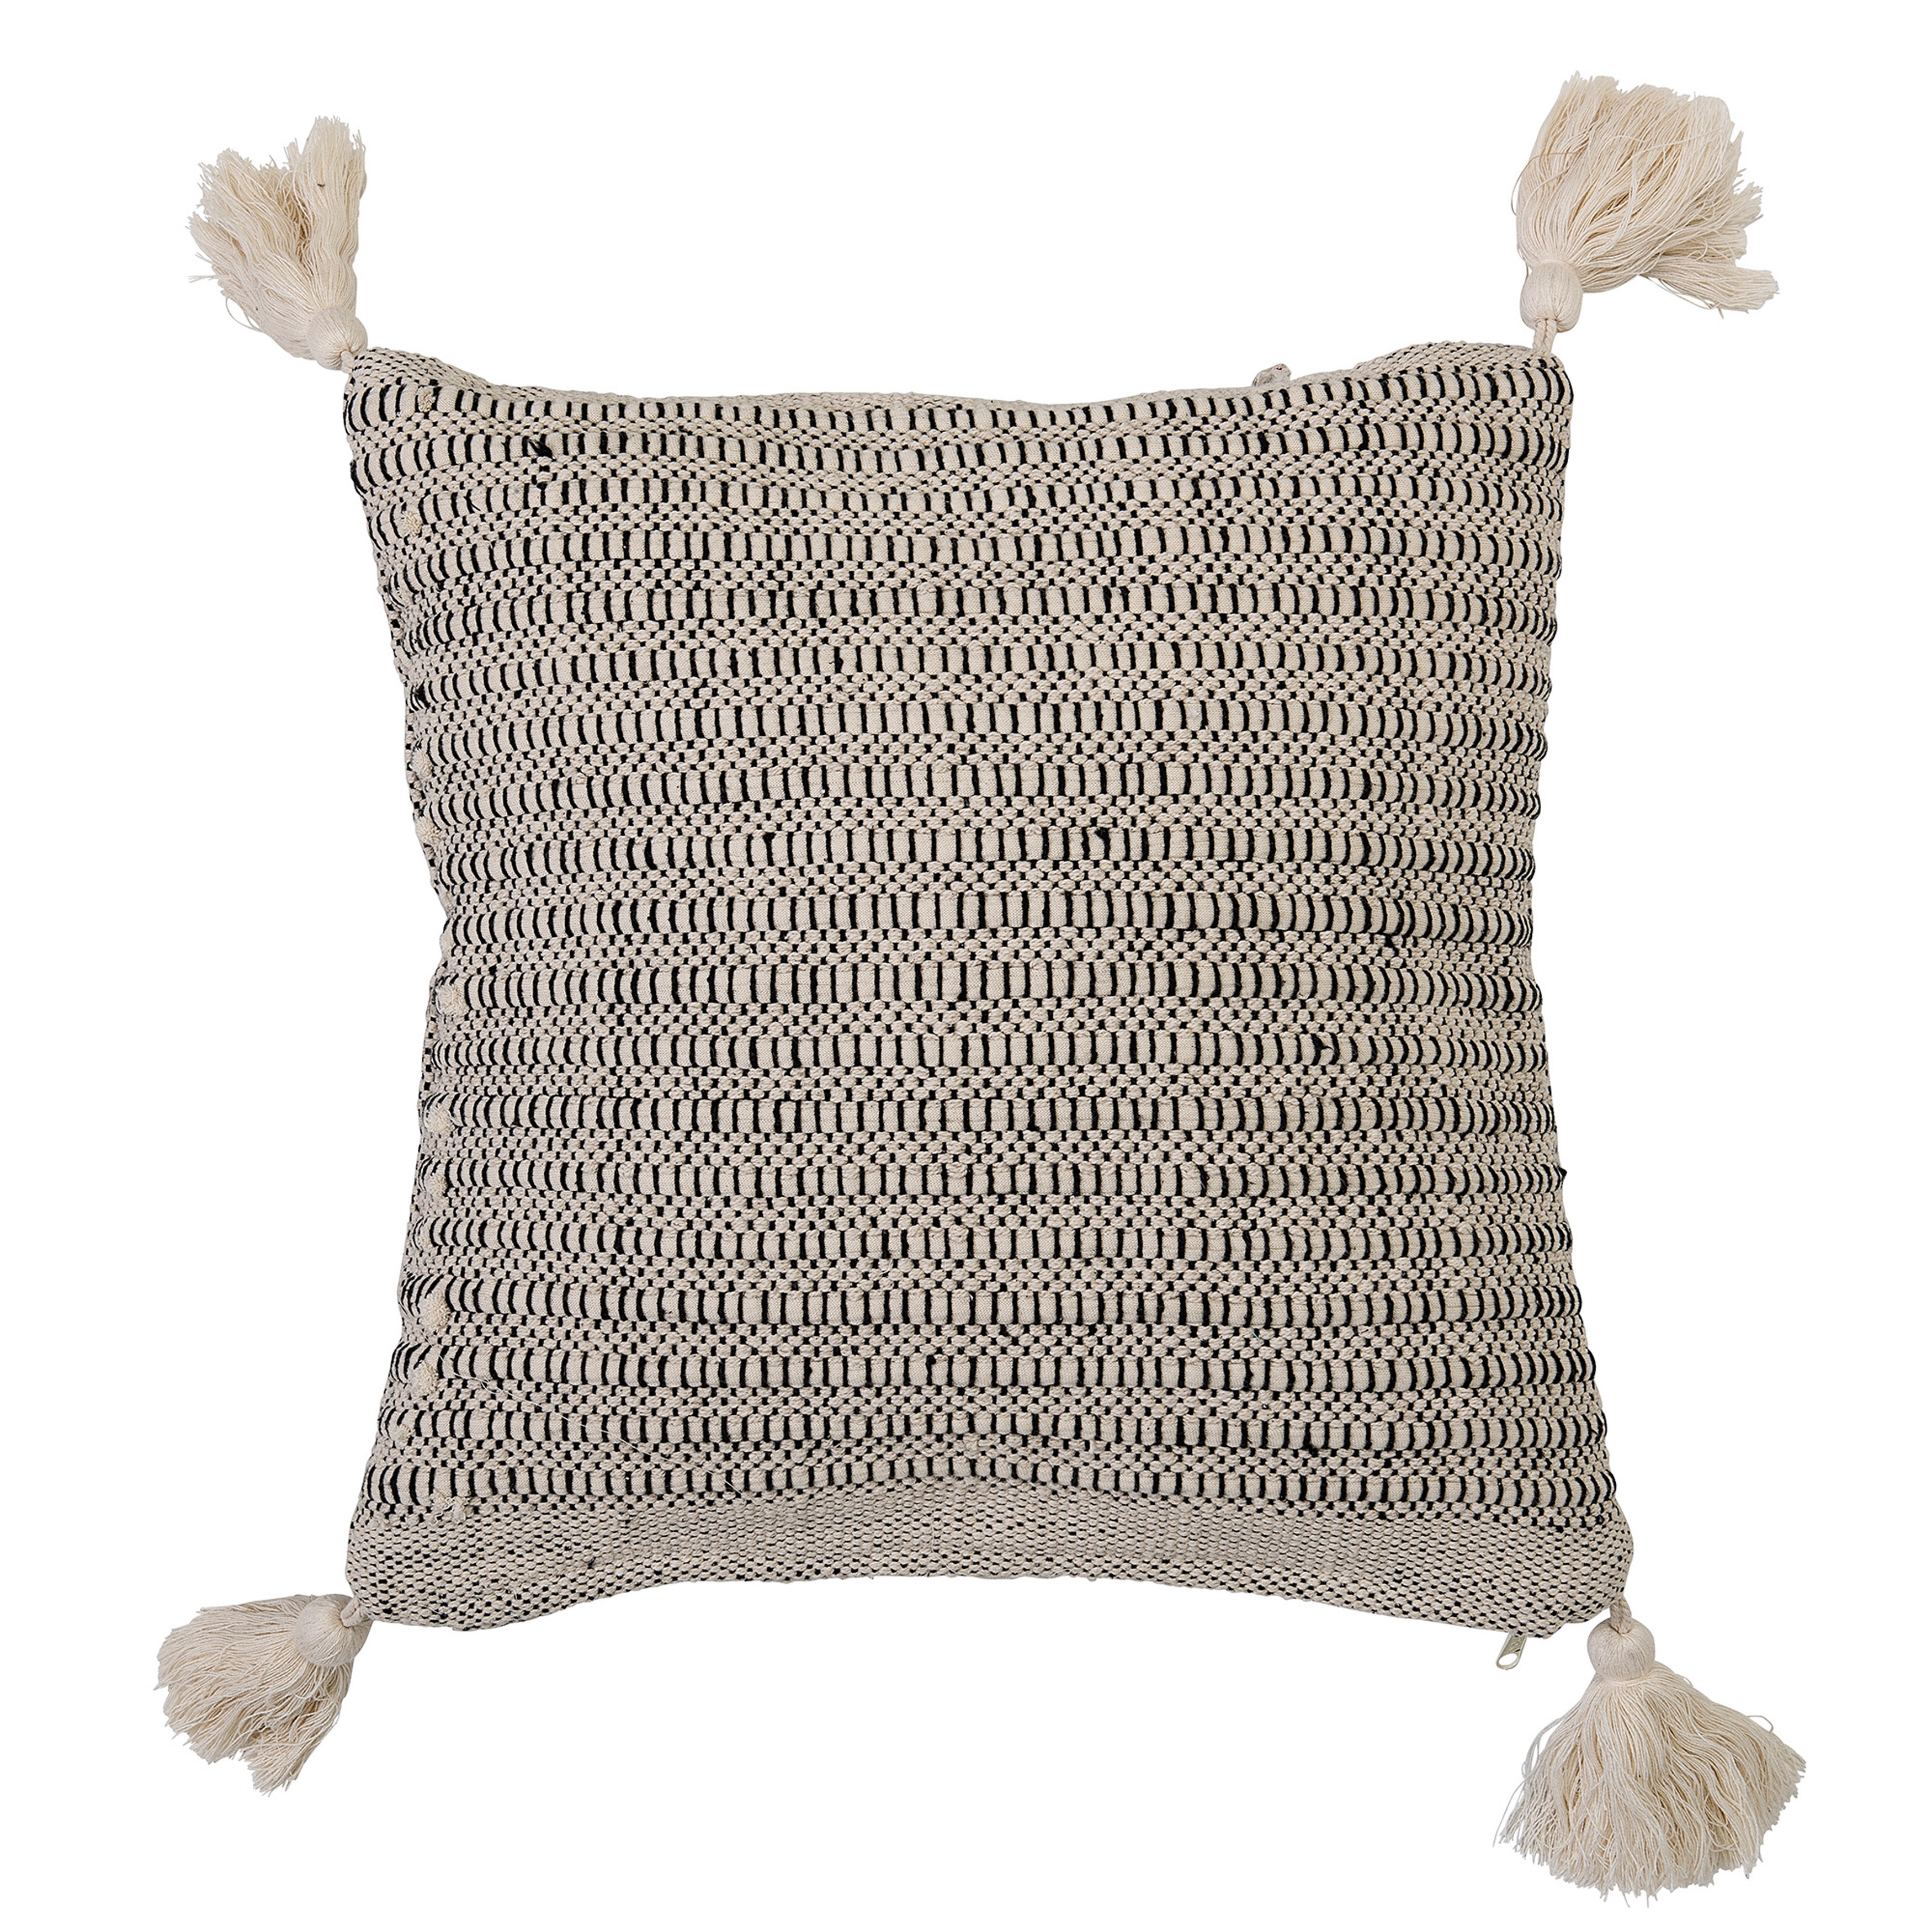 Square Pillow with Corner Tassels, Beige Cotton, 18" x 18" - Image 0